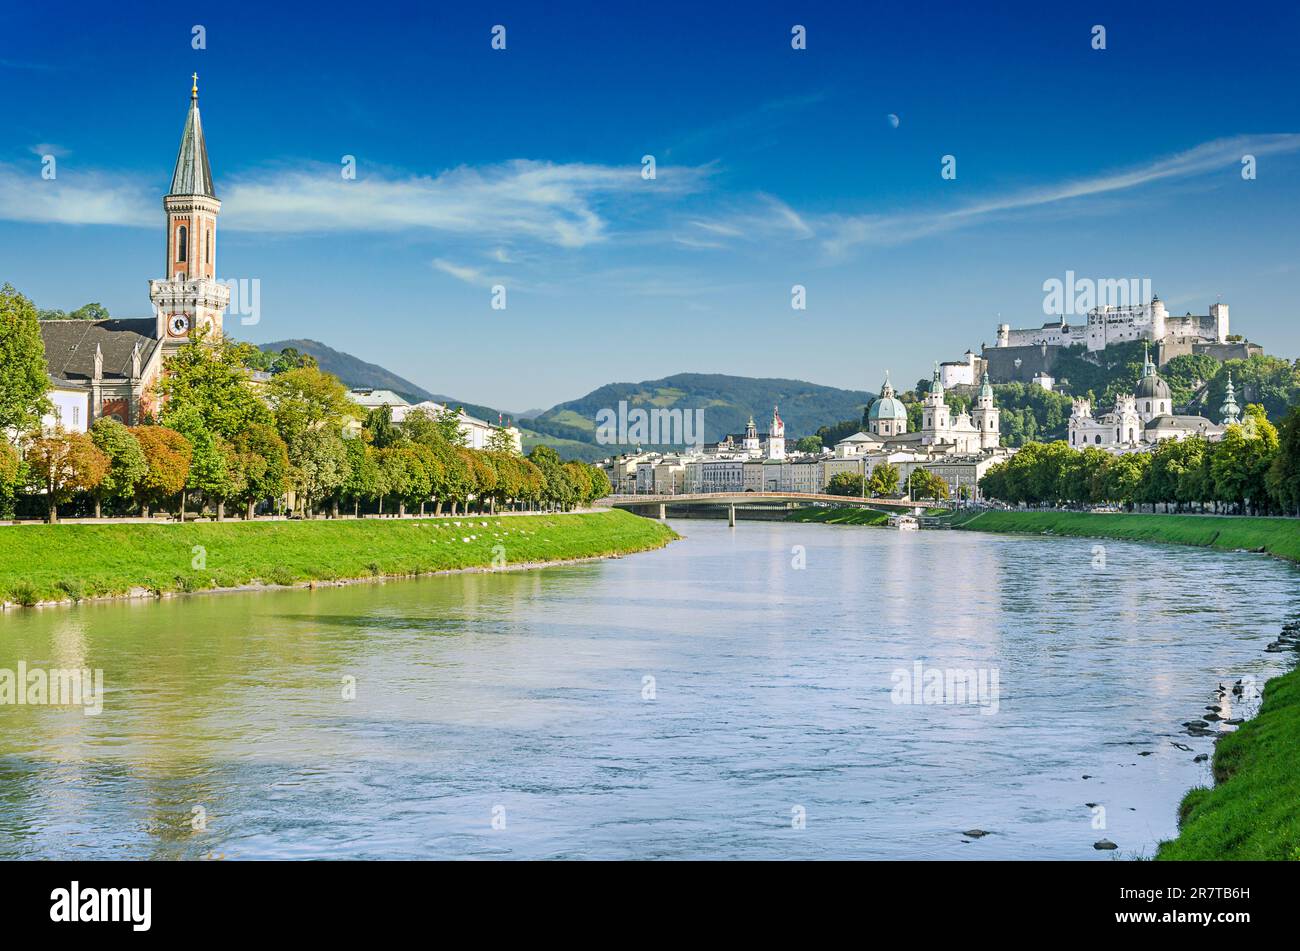 Salzburg, city in Austria, with the Old Town across the Salzach river, Salzburg Cathedral, and Hohensalzburg Fortress in the distance. Stock Photo